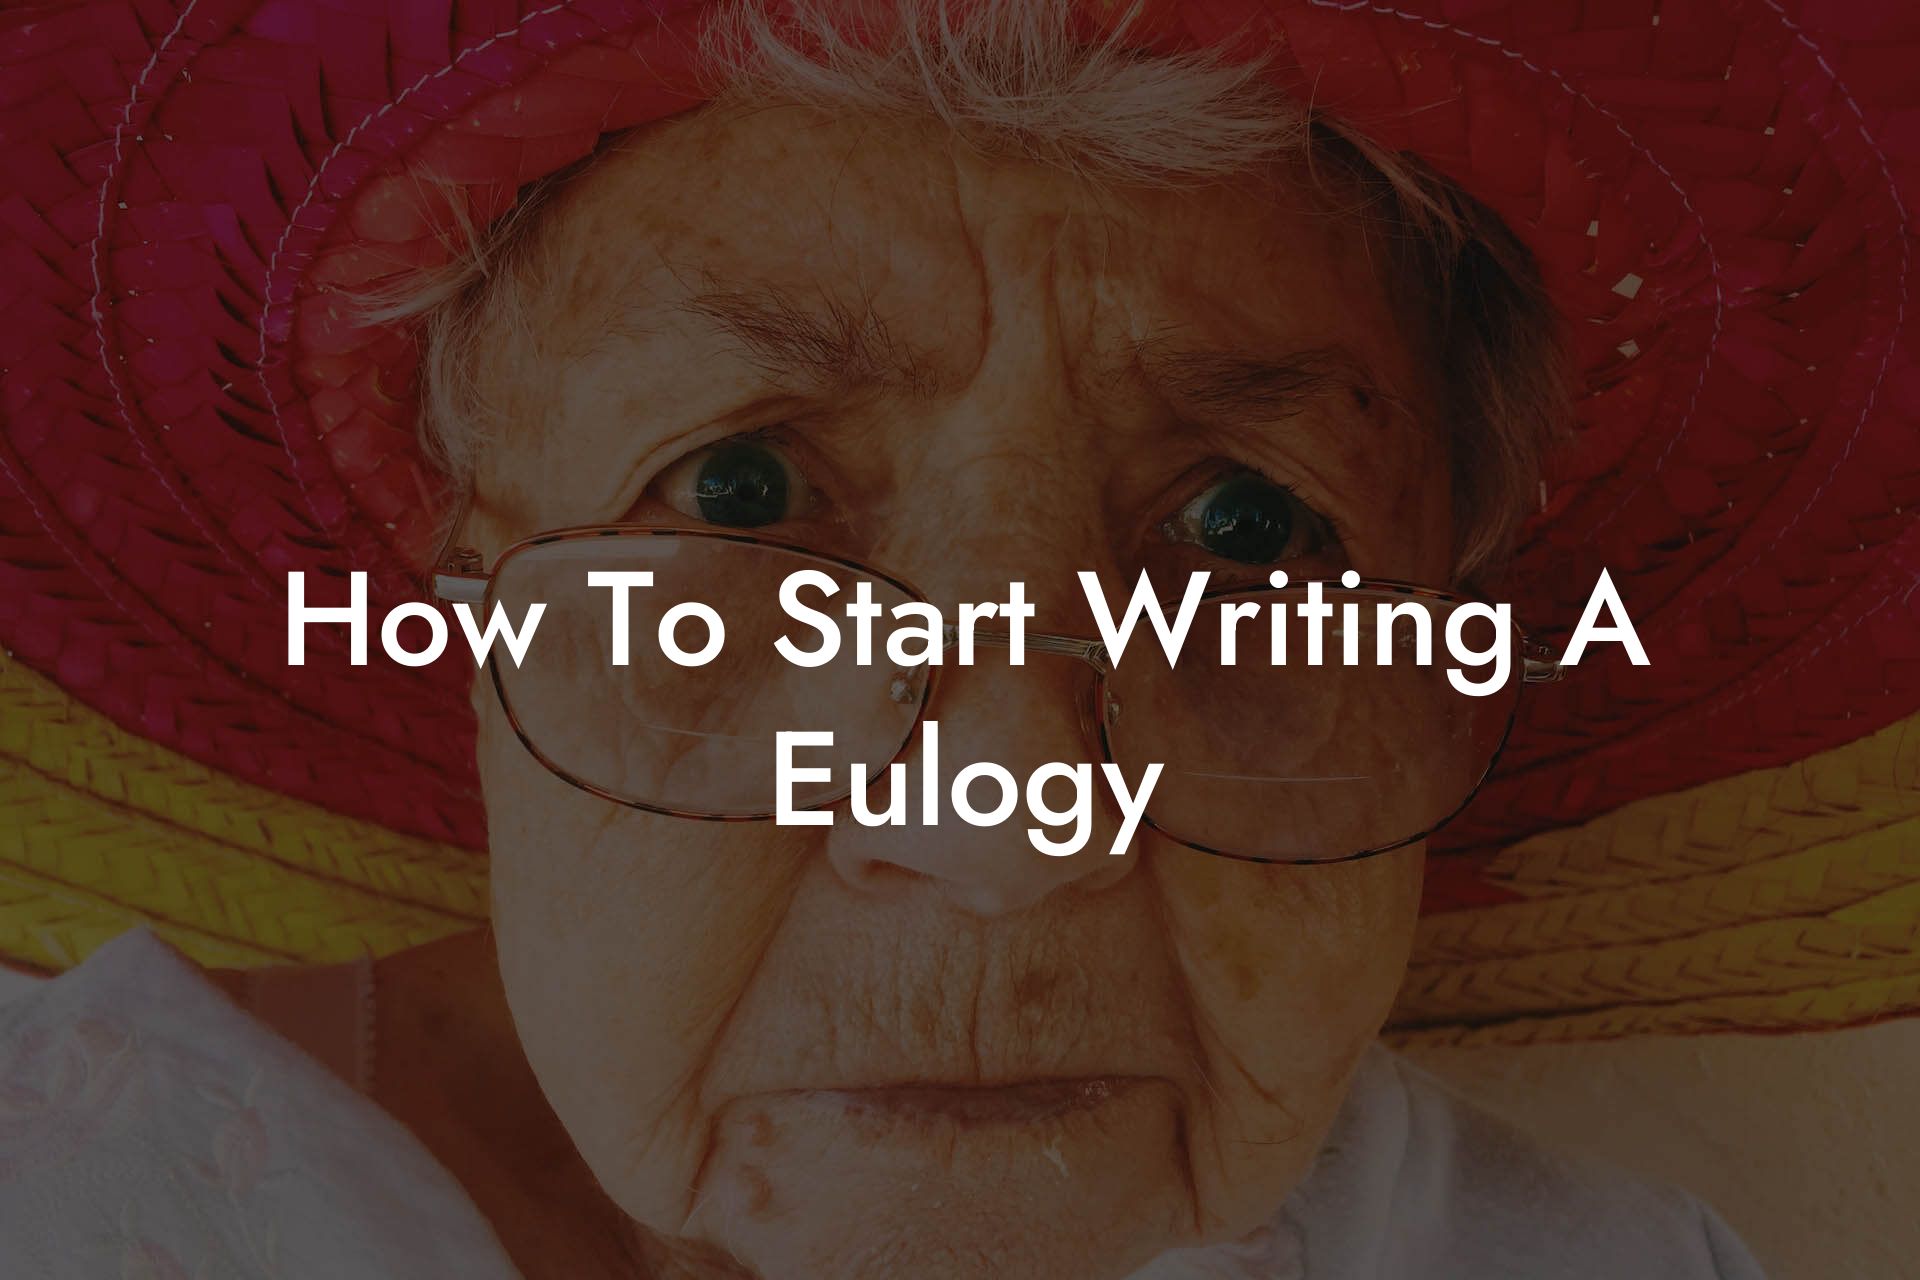 How To Start Writing A Eulogy